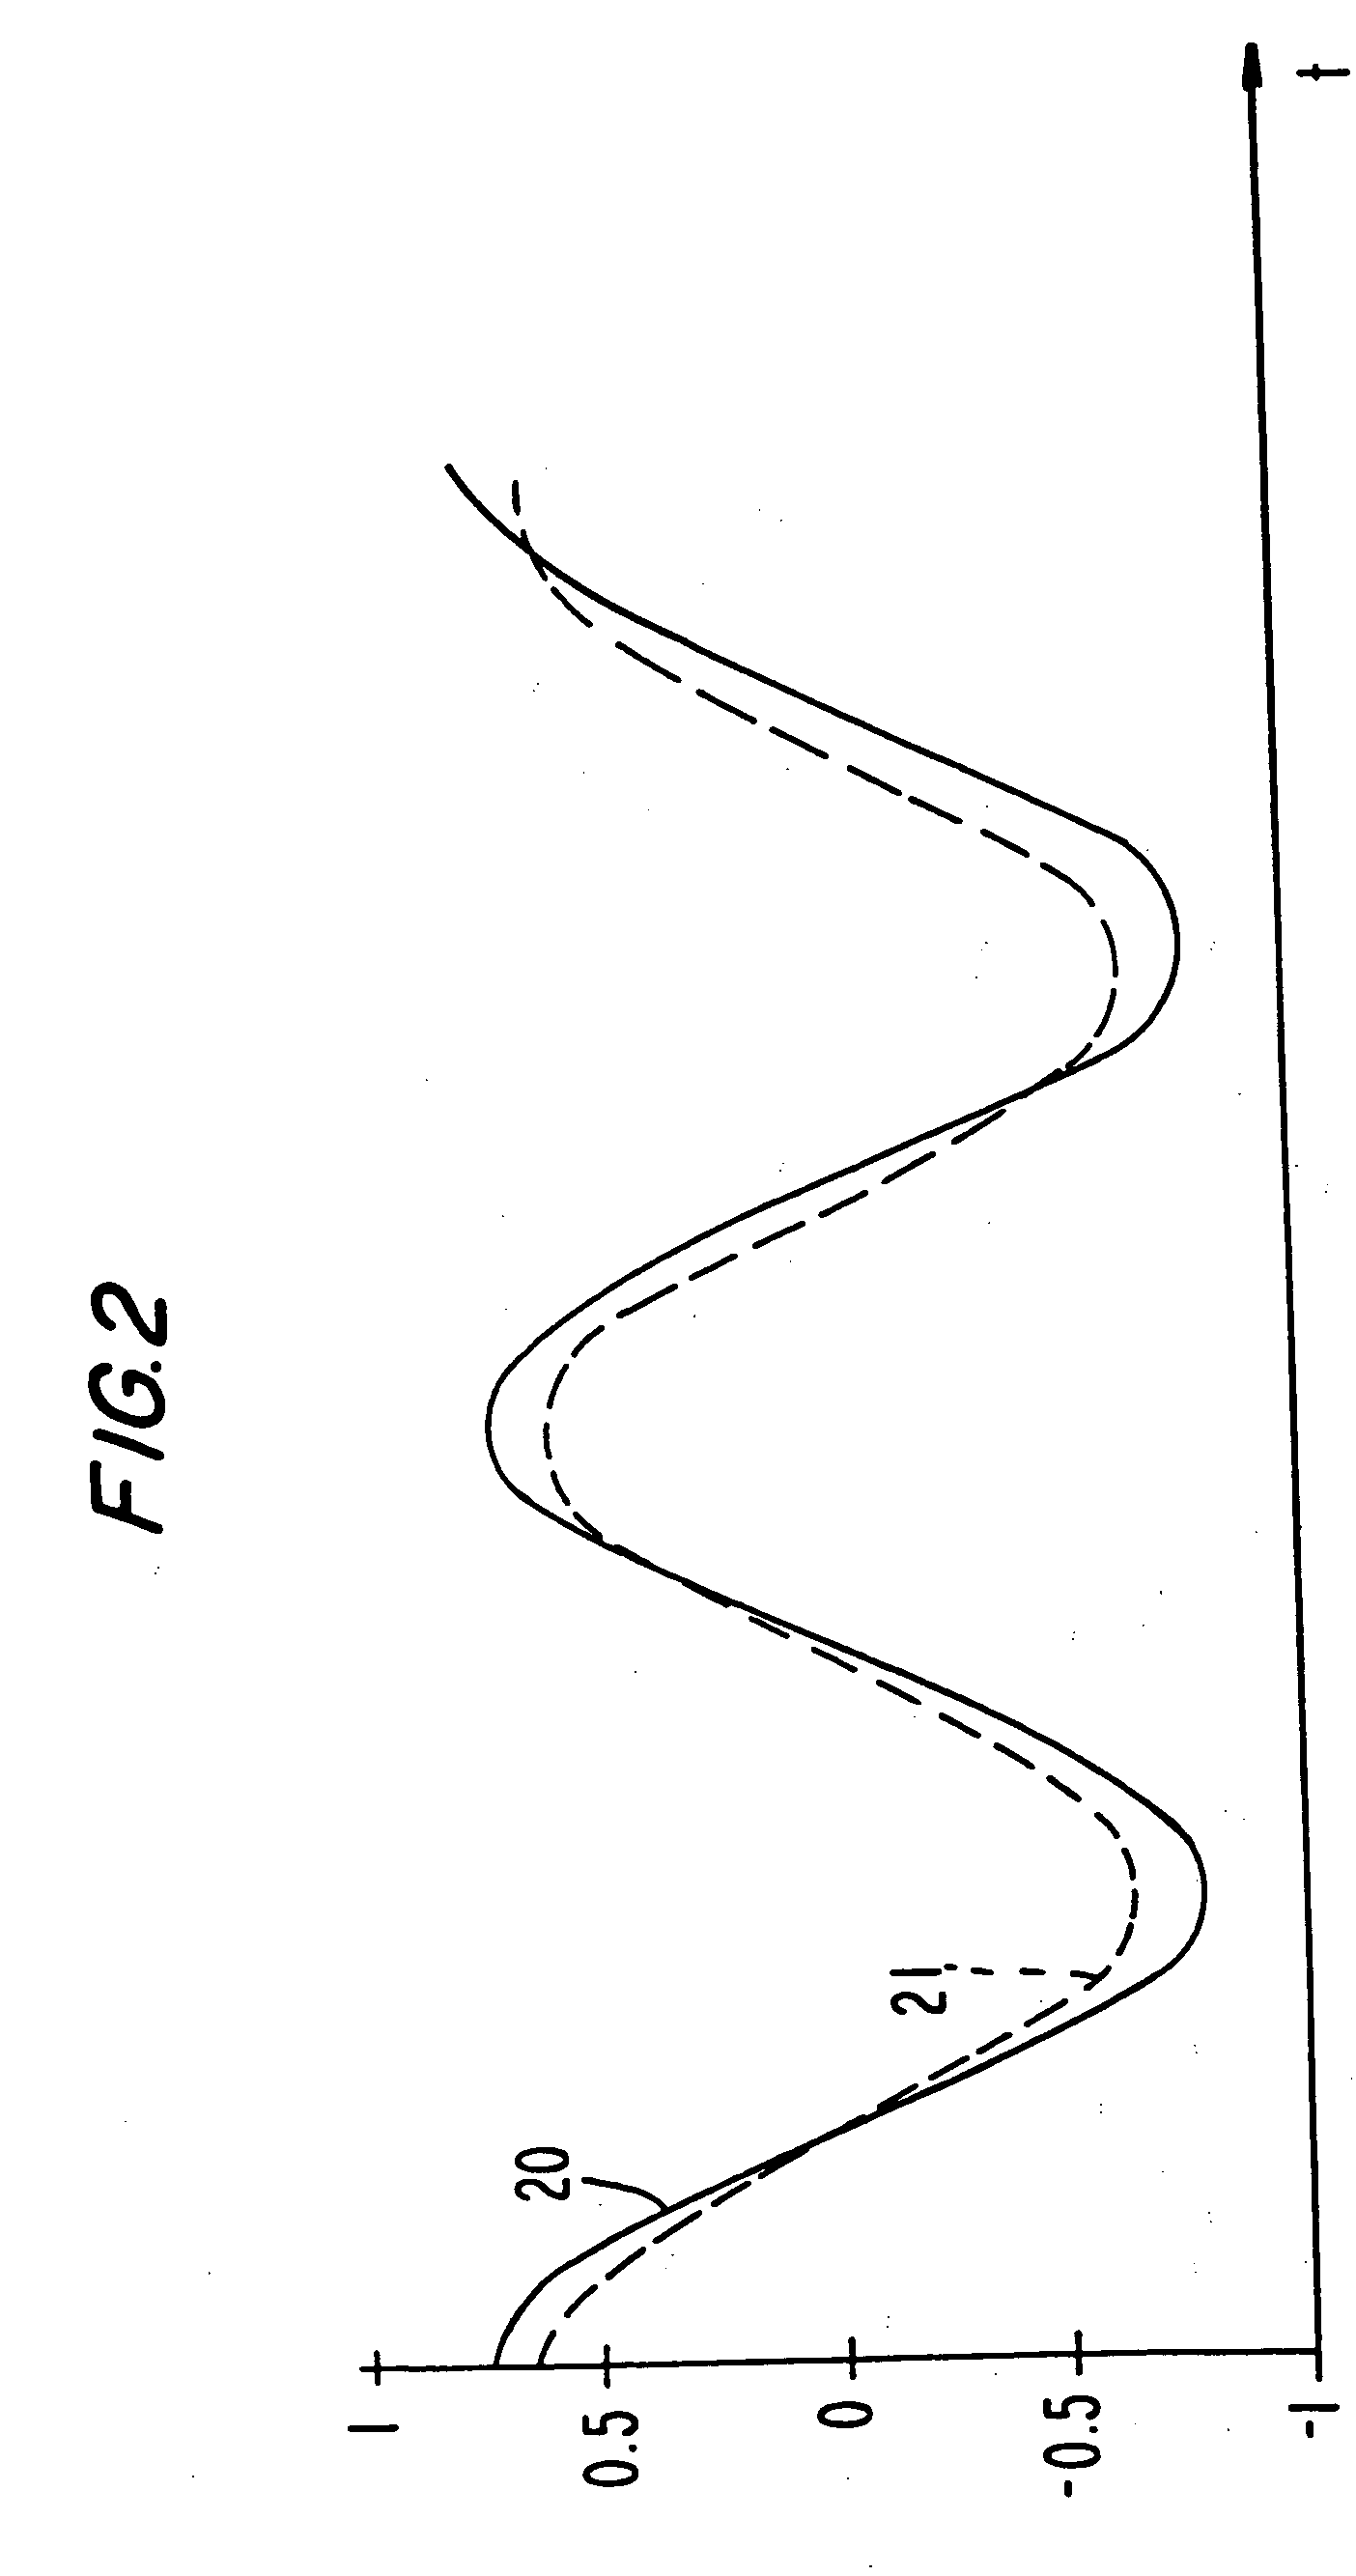 Method and apparatus for measuring and orienting golf club shaft